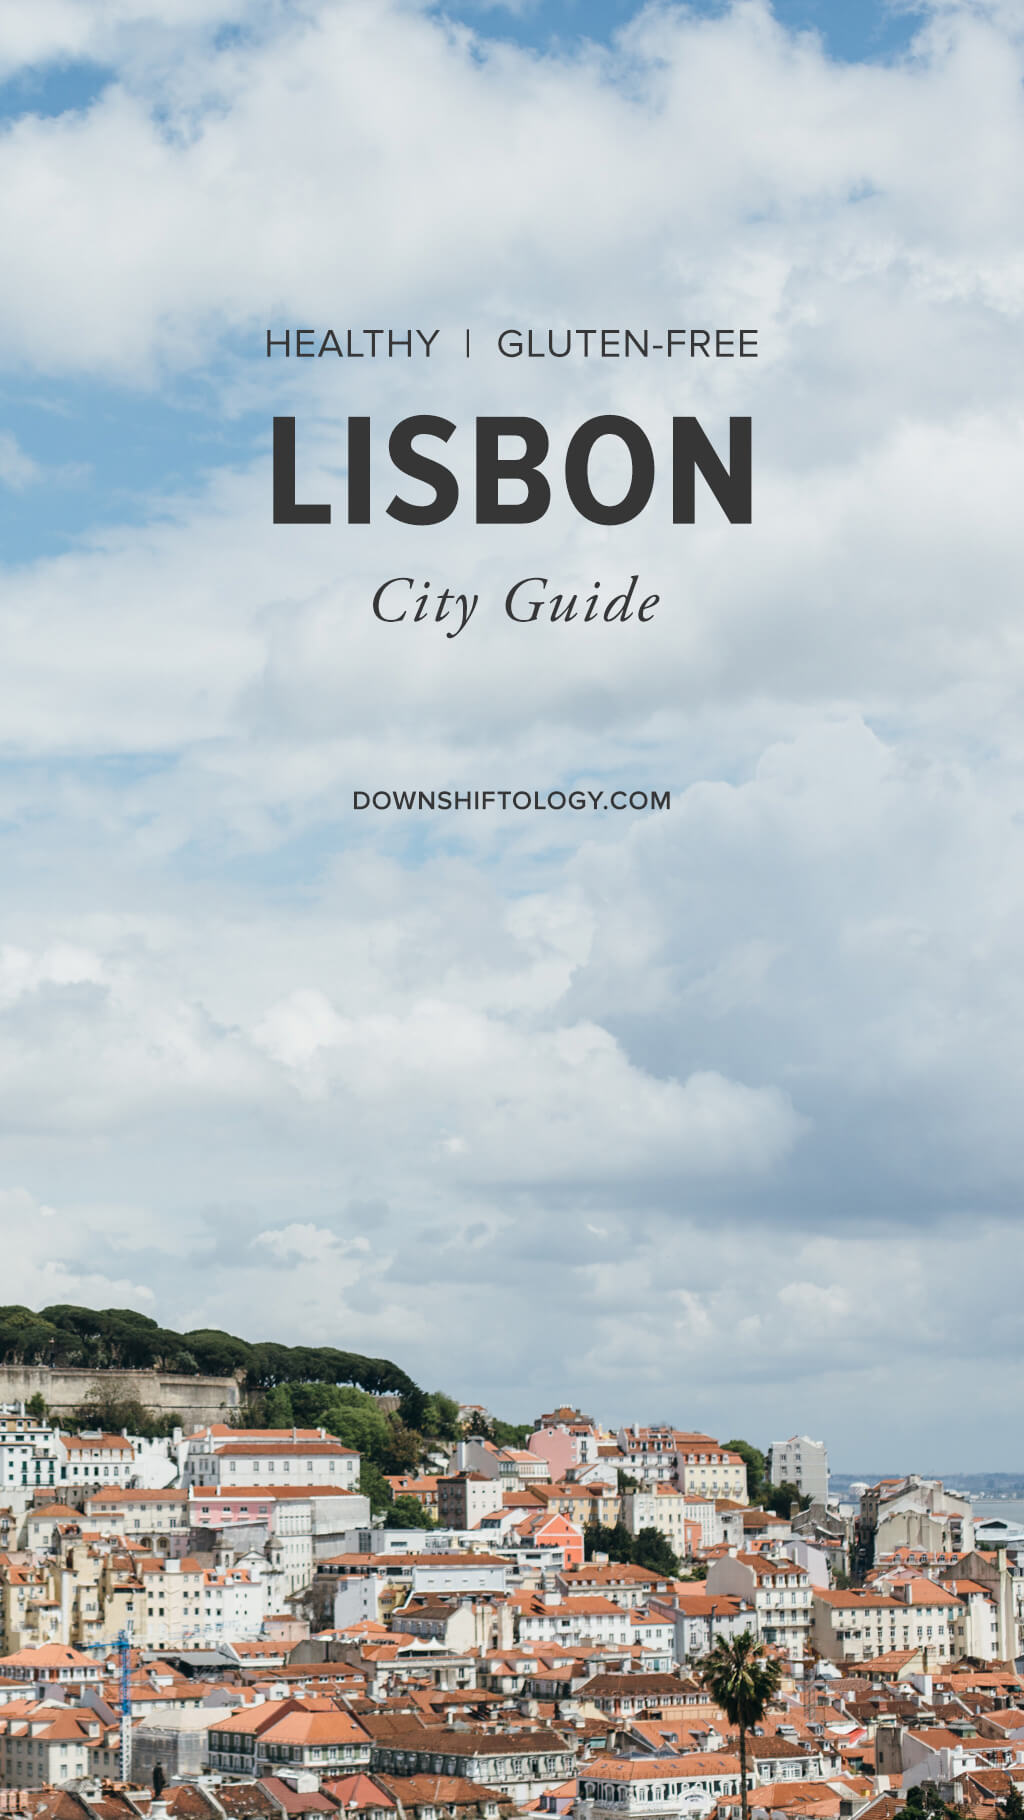 Lisbon City Guide: A healthy, real food, gluten-free travel guide to Lisbon, Portugal.